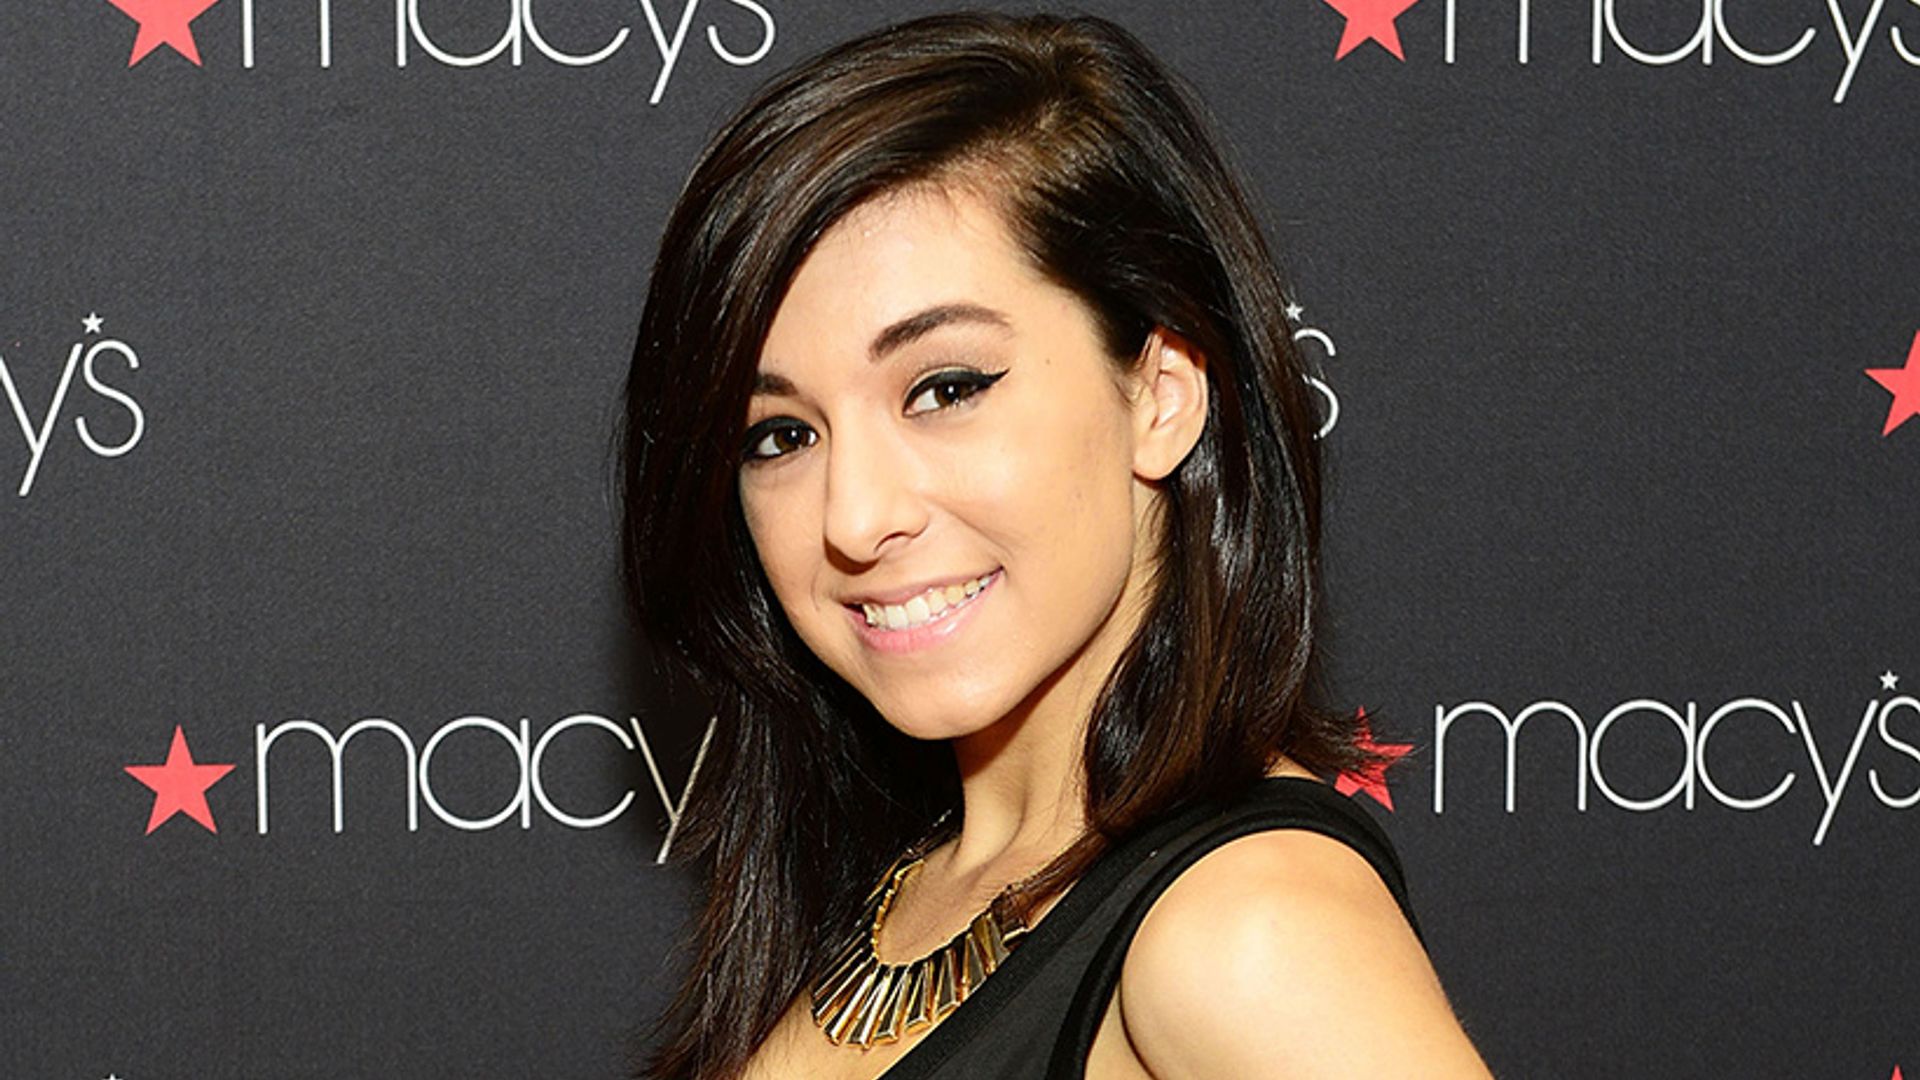 Christina Grimmie's last four music videos to be released